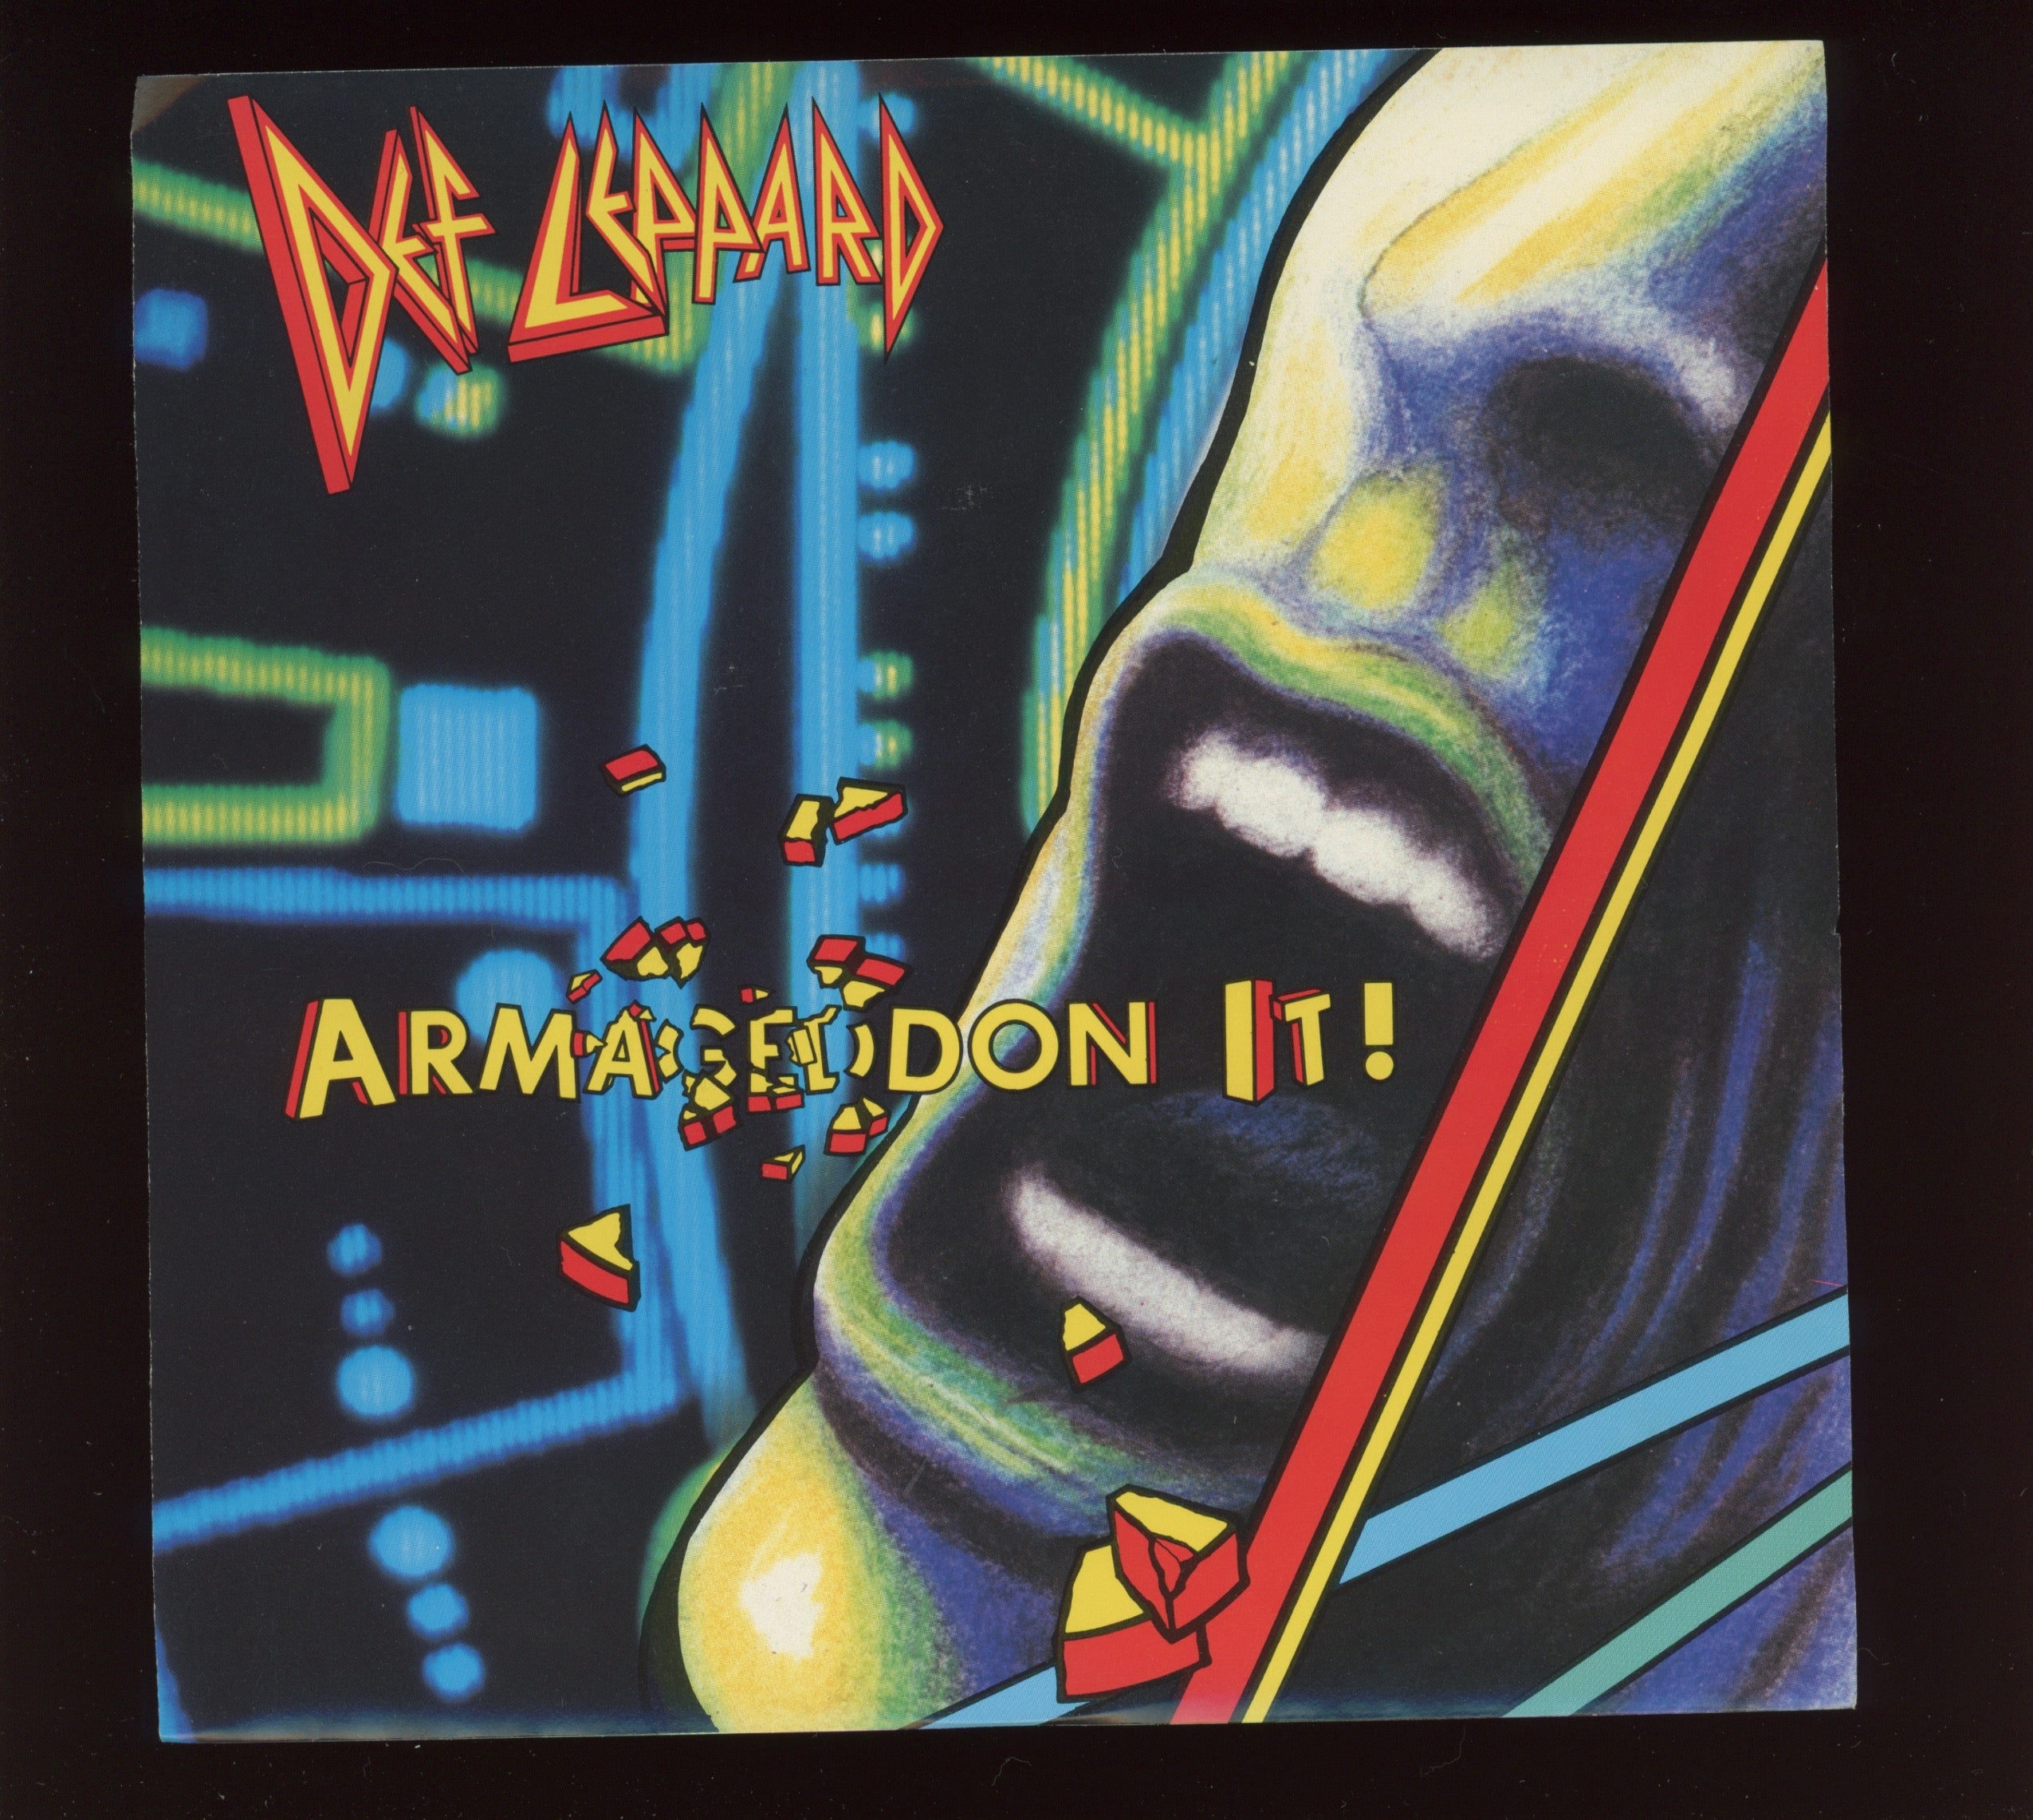 Def Leppard - Armageddon It! on Mercury With Picture Sleeve